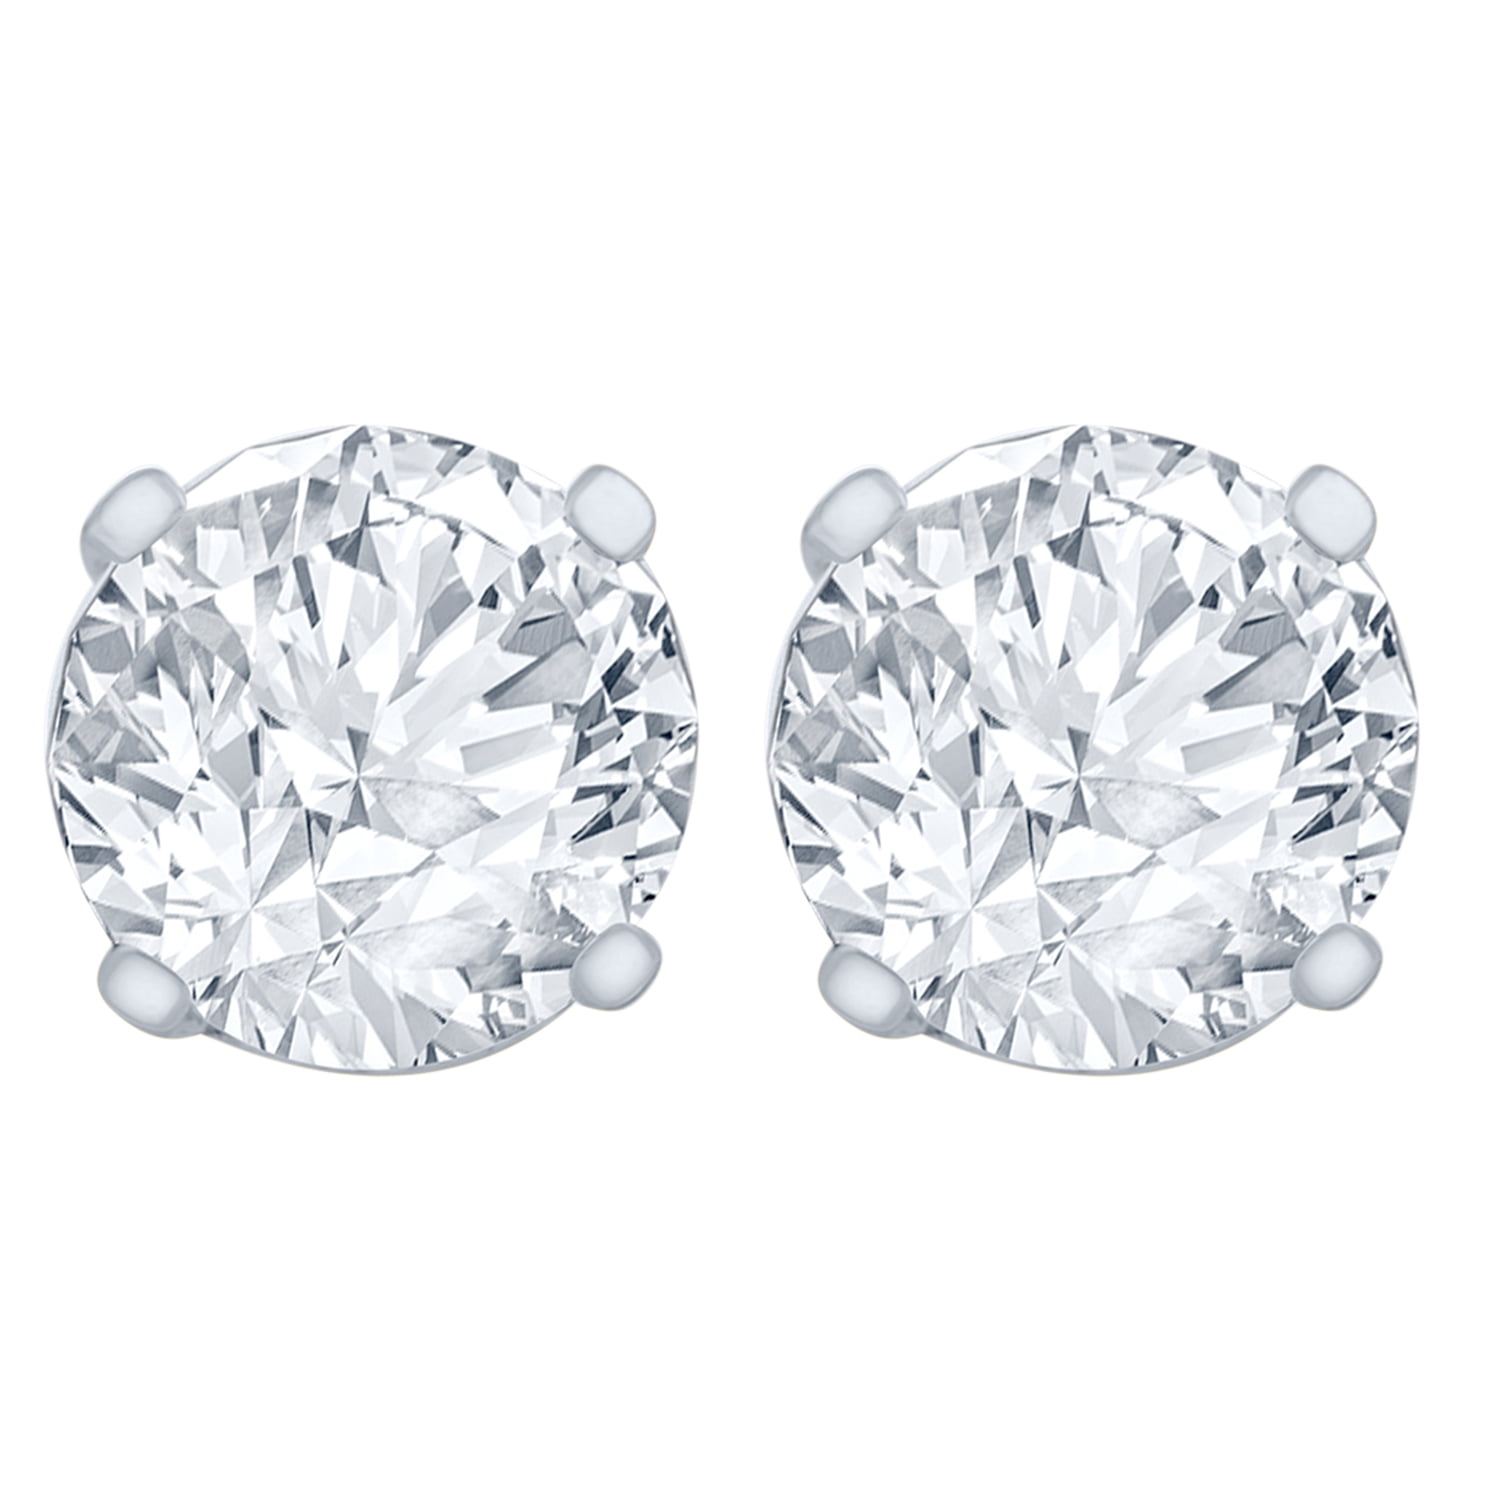 4CT TW 8MM STUD EARRINGS MOUNTING 14K WHITE GOLD